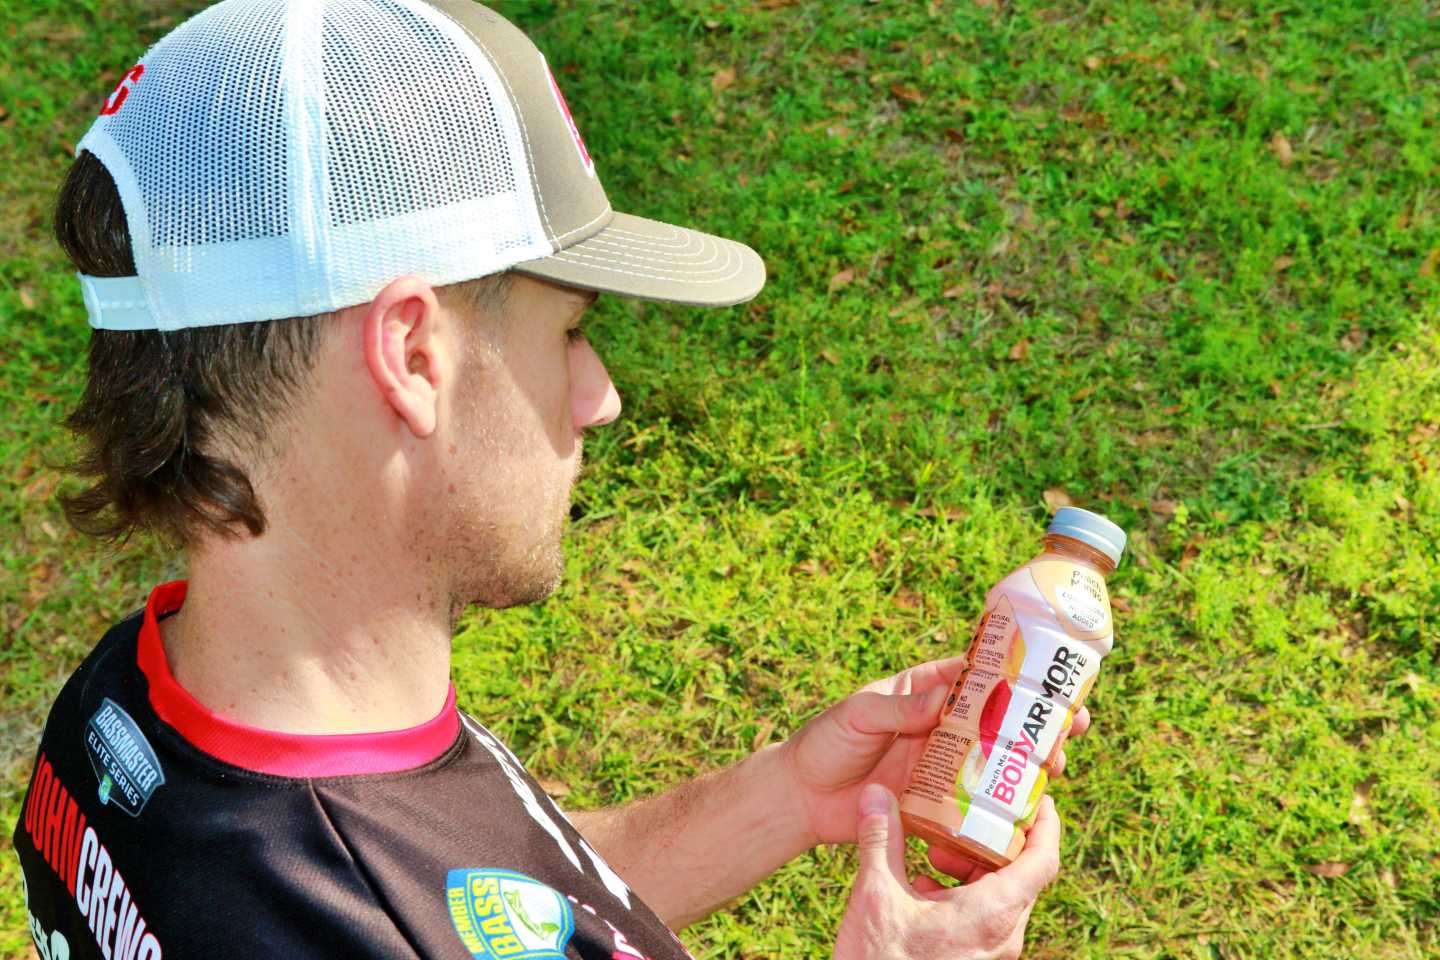 Crews will supplement his bottled water with one sports drink for the electrolytes. Heâs selective about the beverageâs ingredients, as healthy consumption is a big part of his regimen.